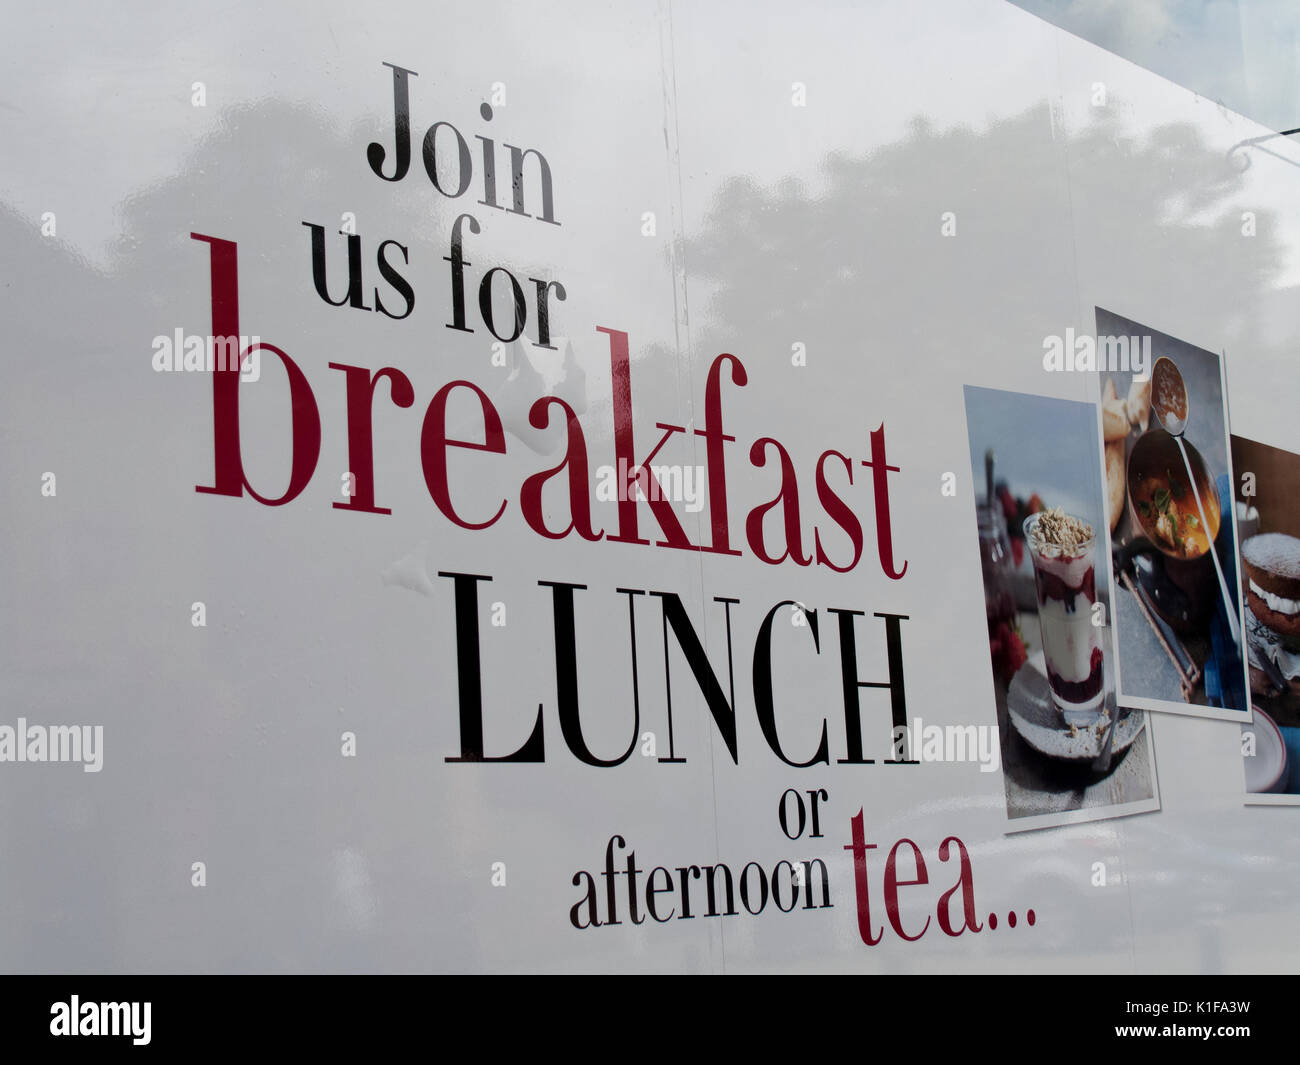 Debenhams Department store joint us for breakfast lunch or afternoon tea sign advertising instore cafe Stock Photo